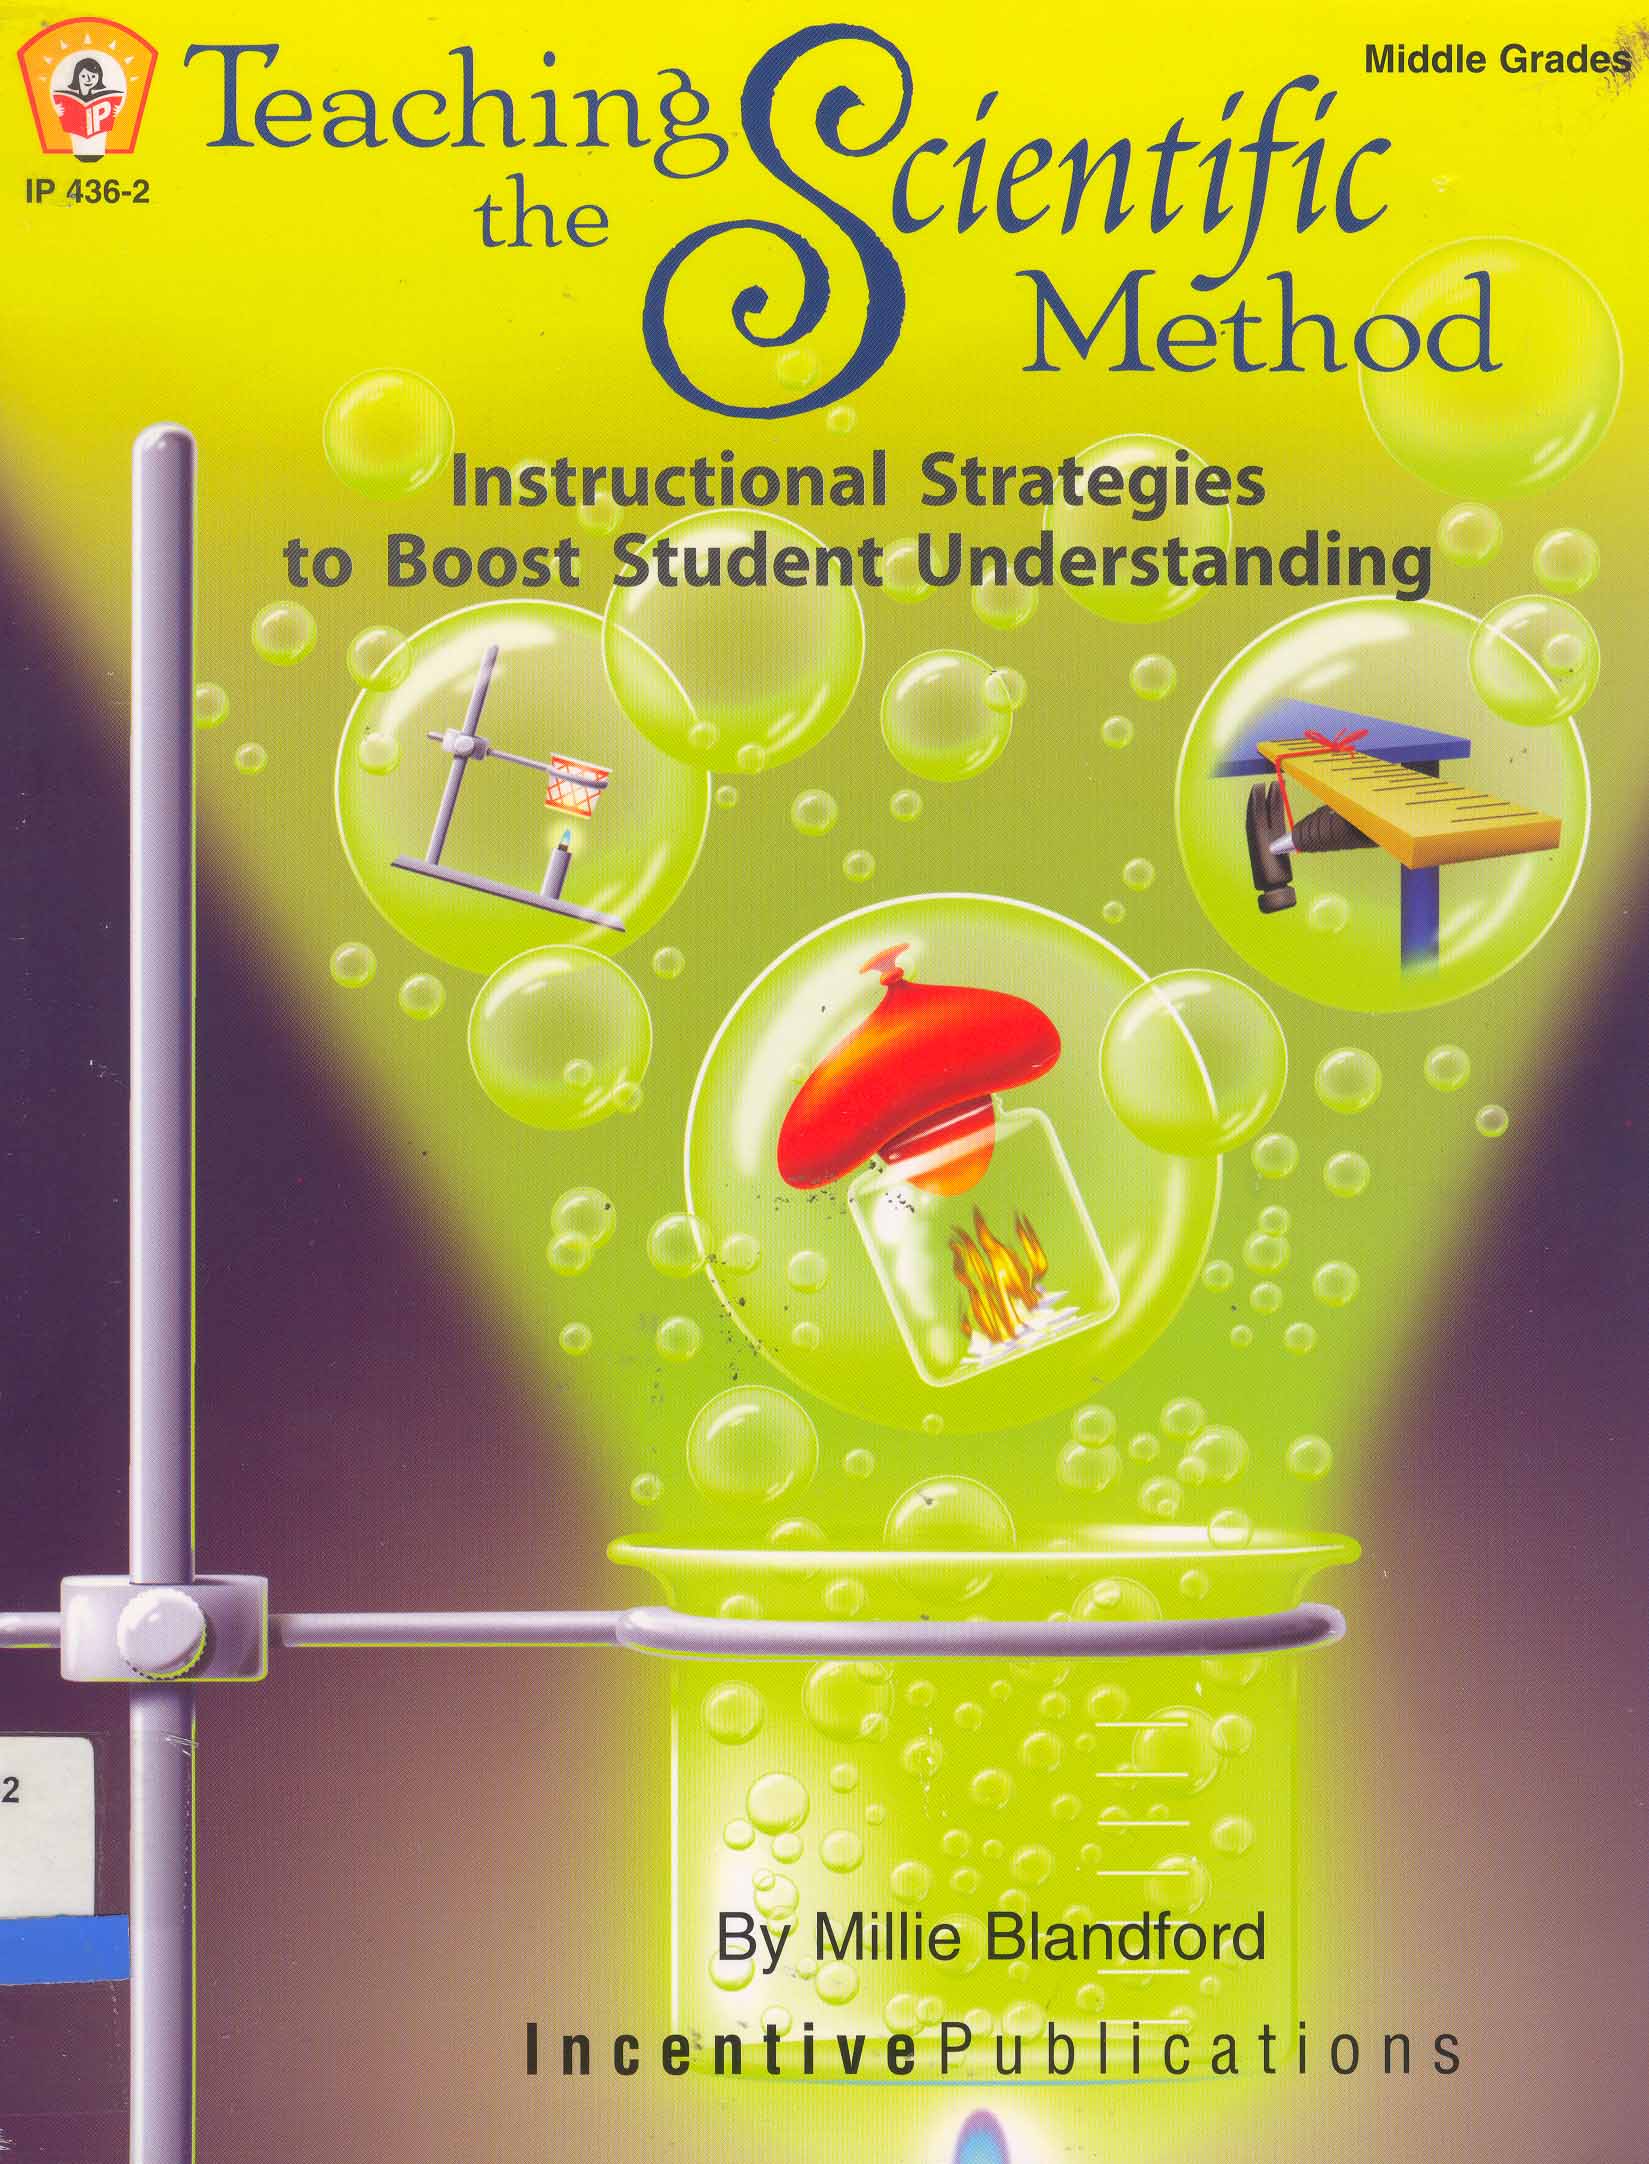 Insight student book